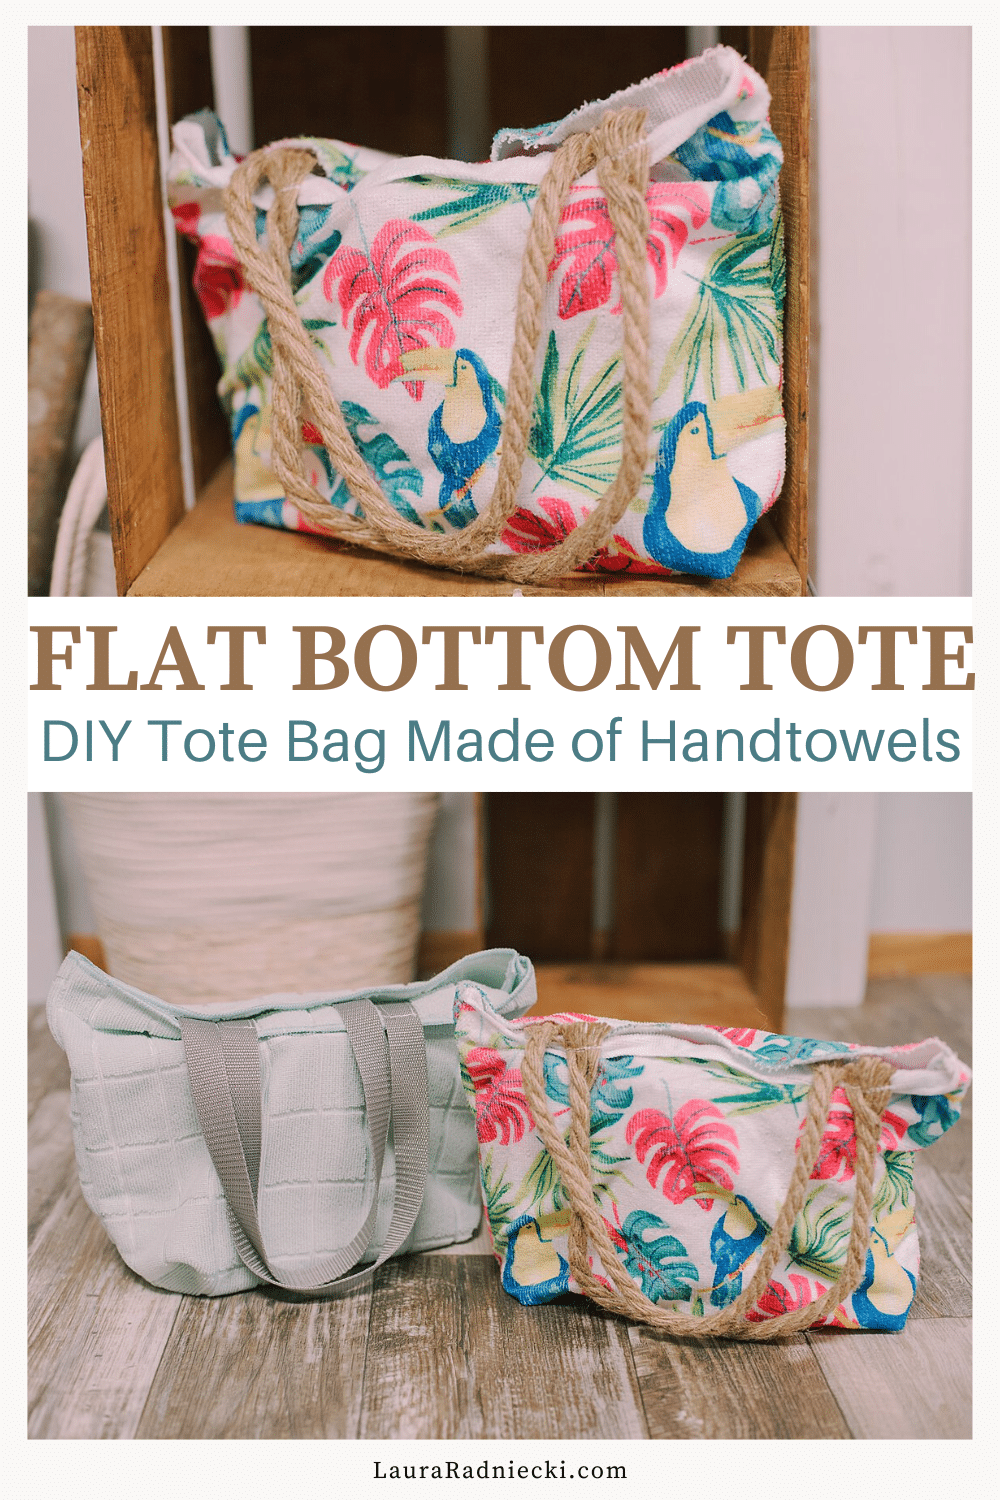 How to Make a Flat Bottom Tote Bag Out of Hand Towels